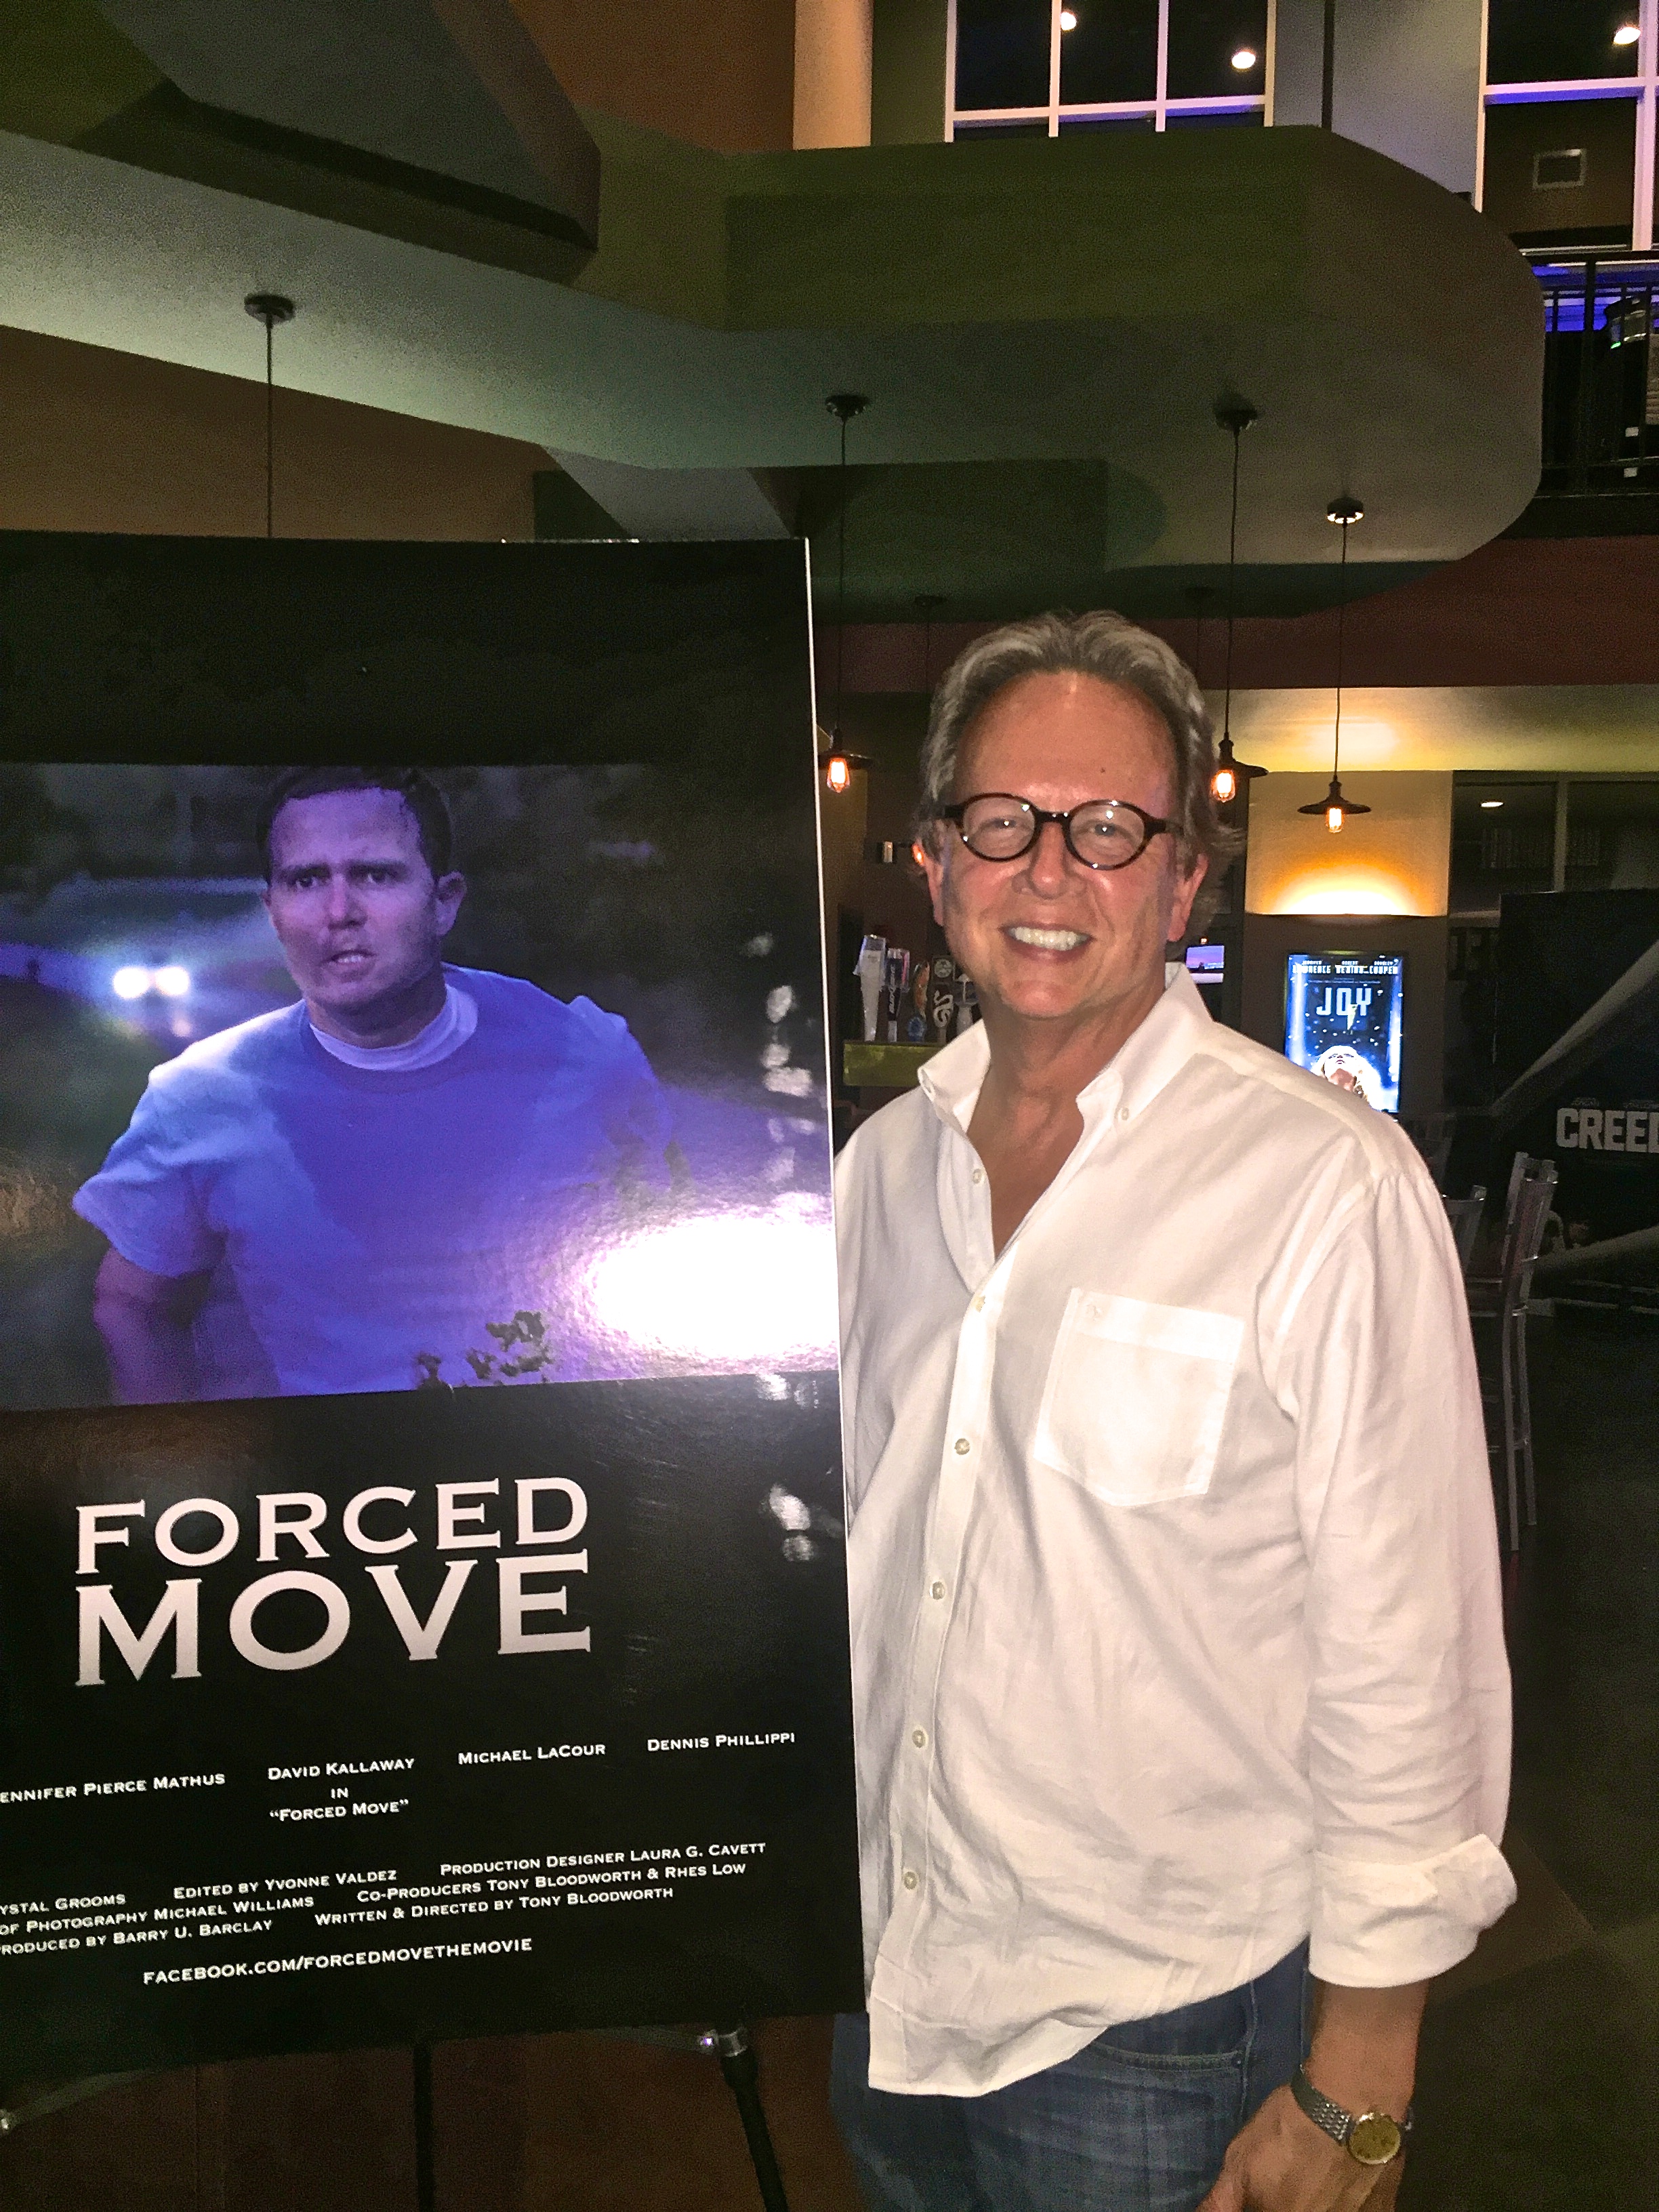 Forced Move Premiere Showing for cast and crew in Oxford, MS